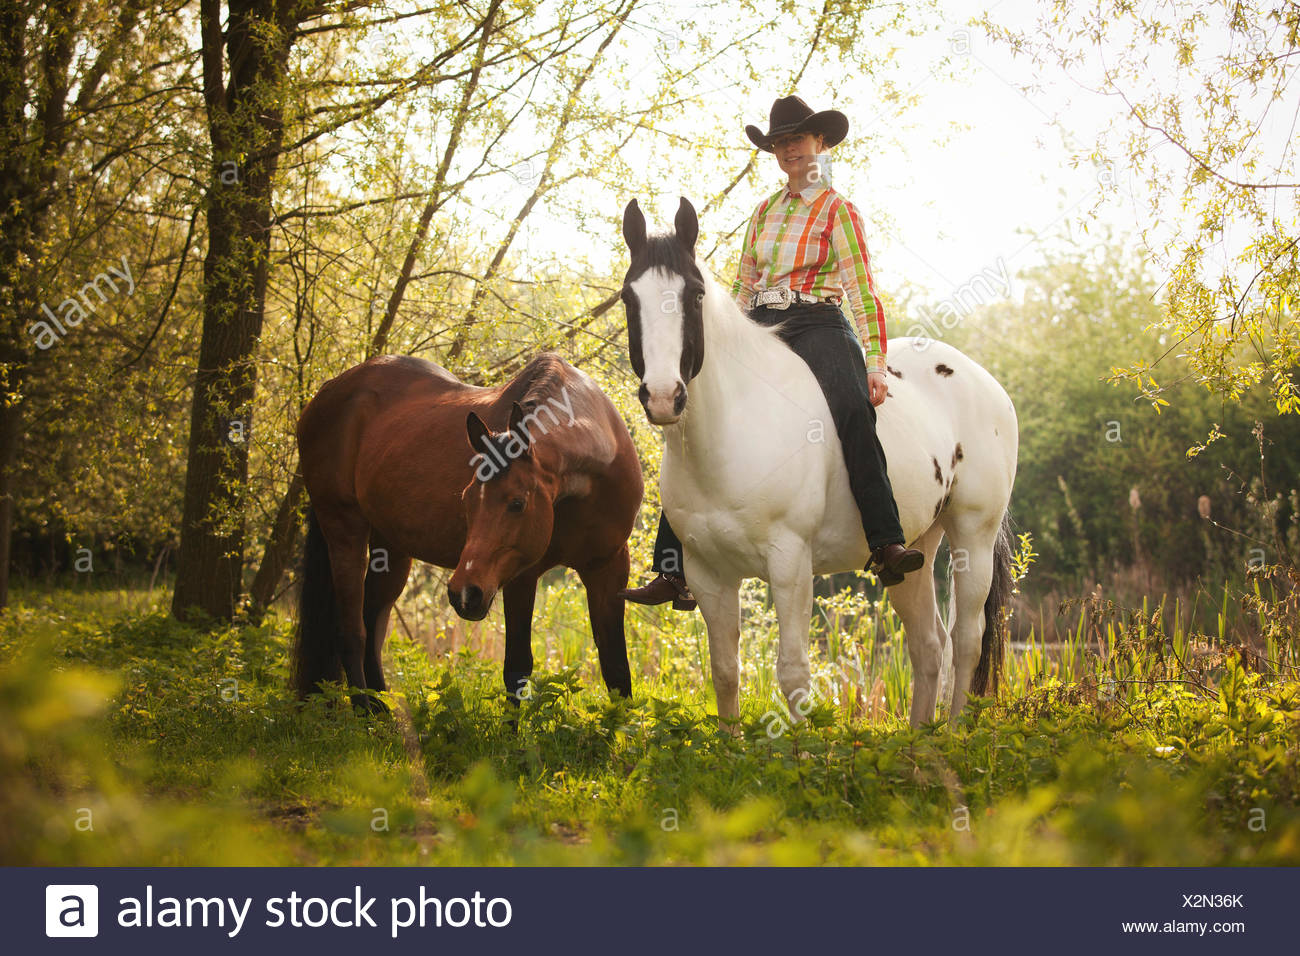 Bareback Horse Rider High Resolution Stock Photography and Images - Alamy